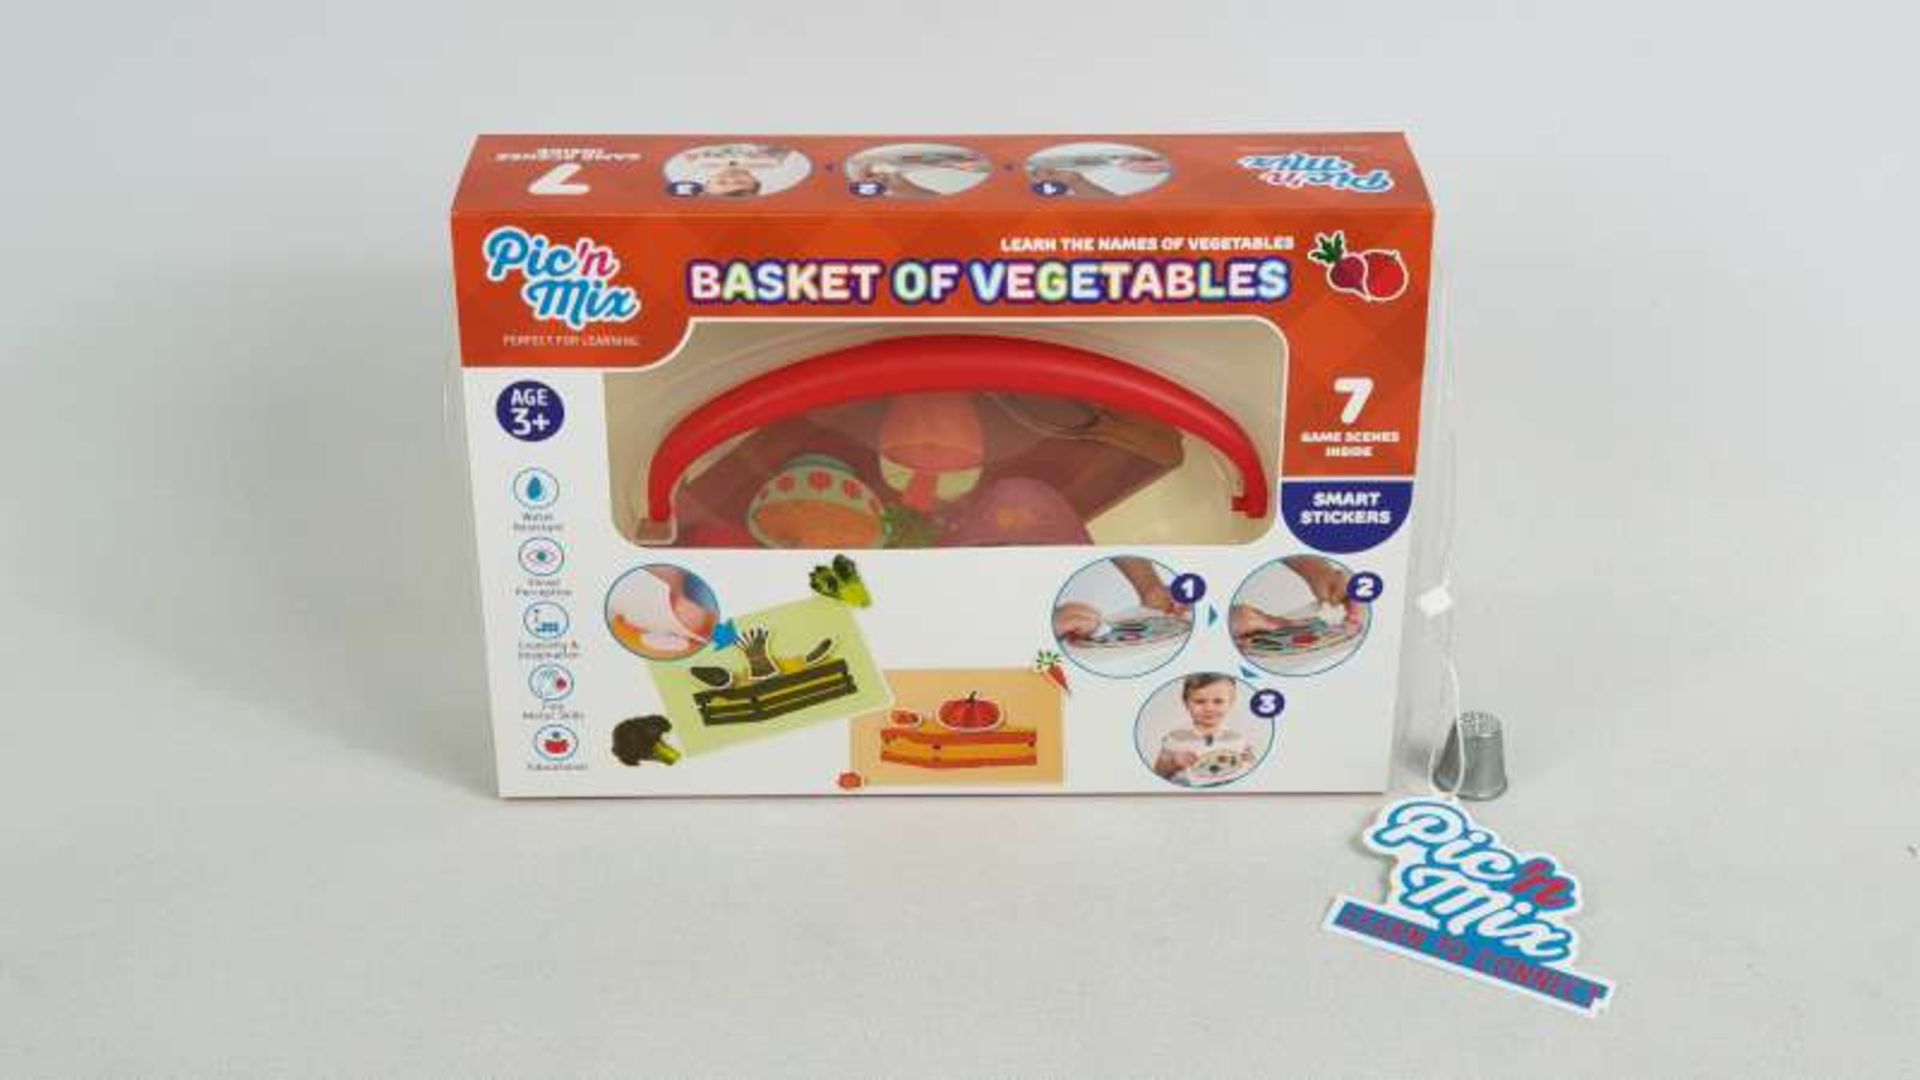 24 X BRAND NEW BOXED PIC N MIX BASKET OF VEGETABLES EDUCATIONAL LEARNING GAMES IN 1 BOX